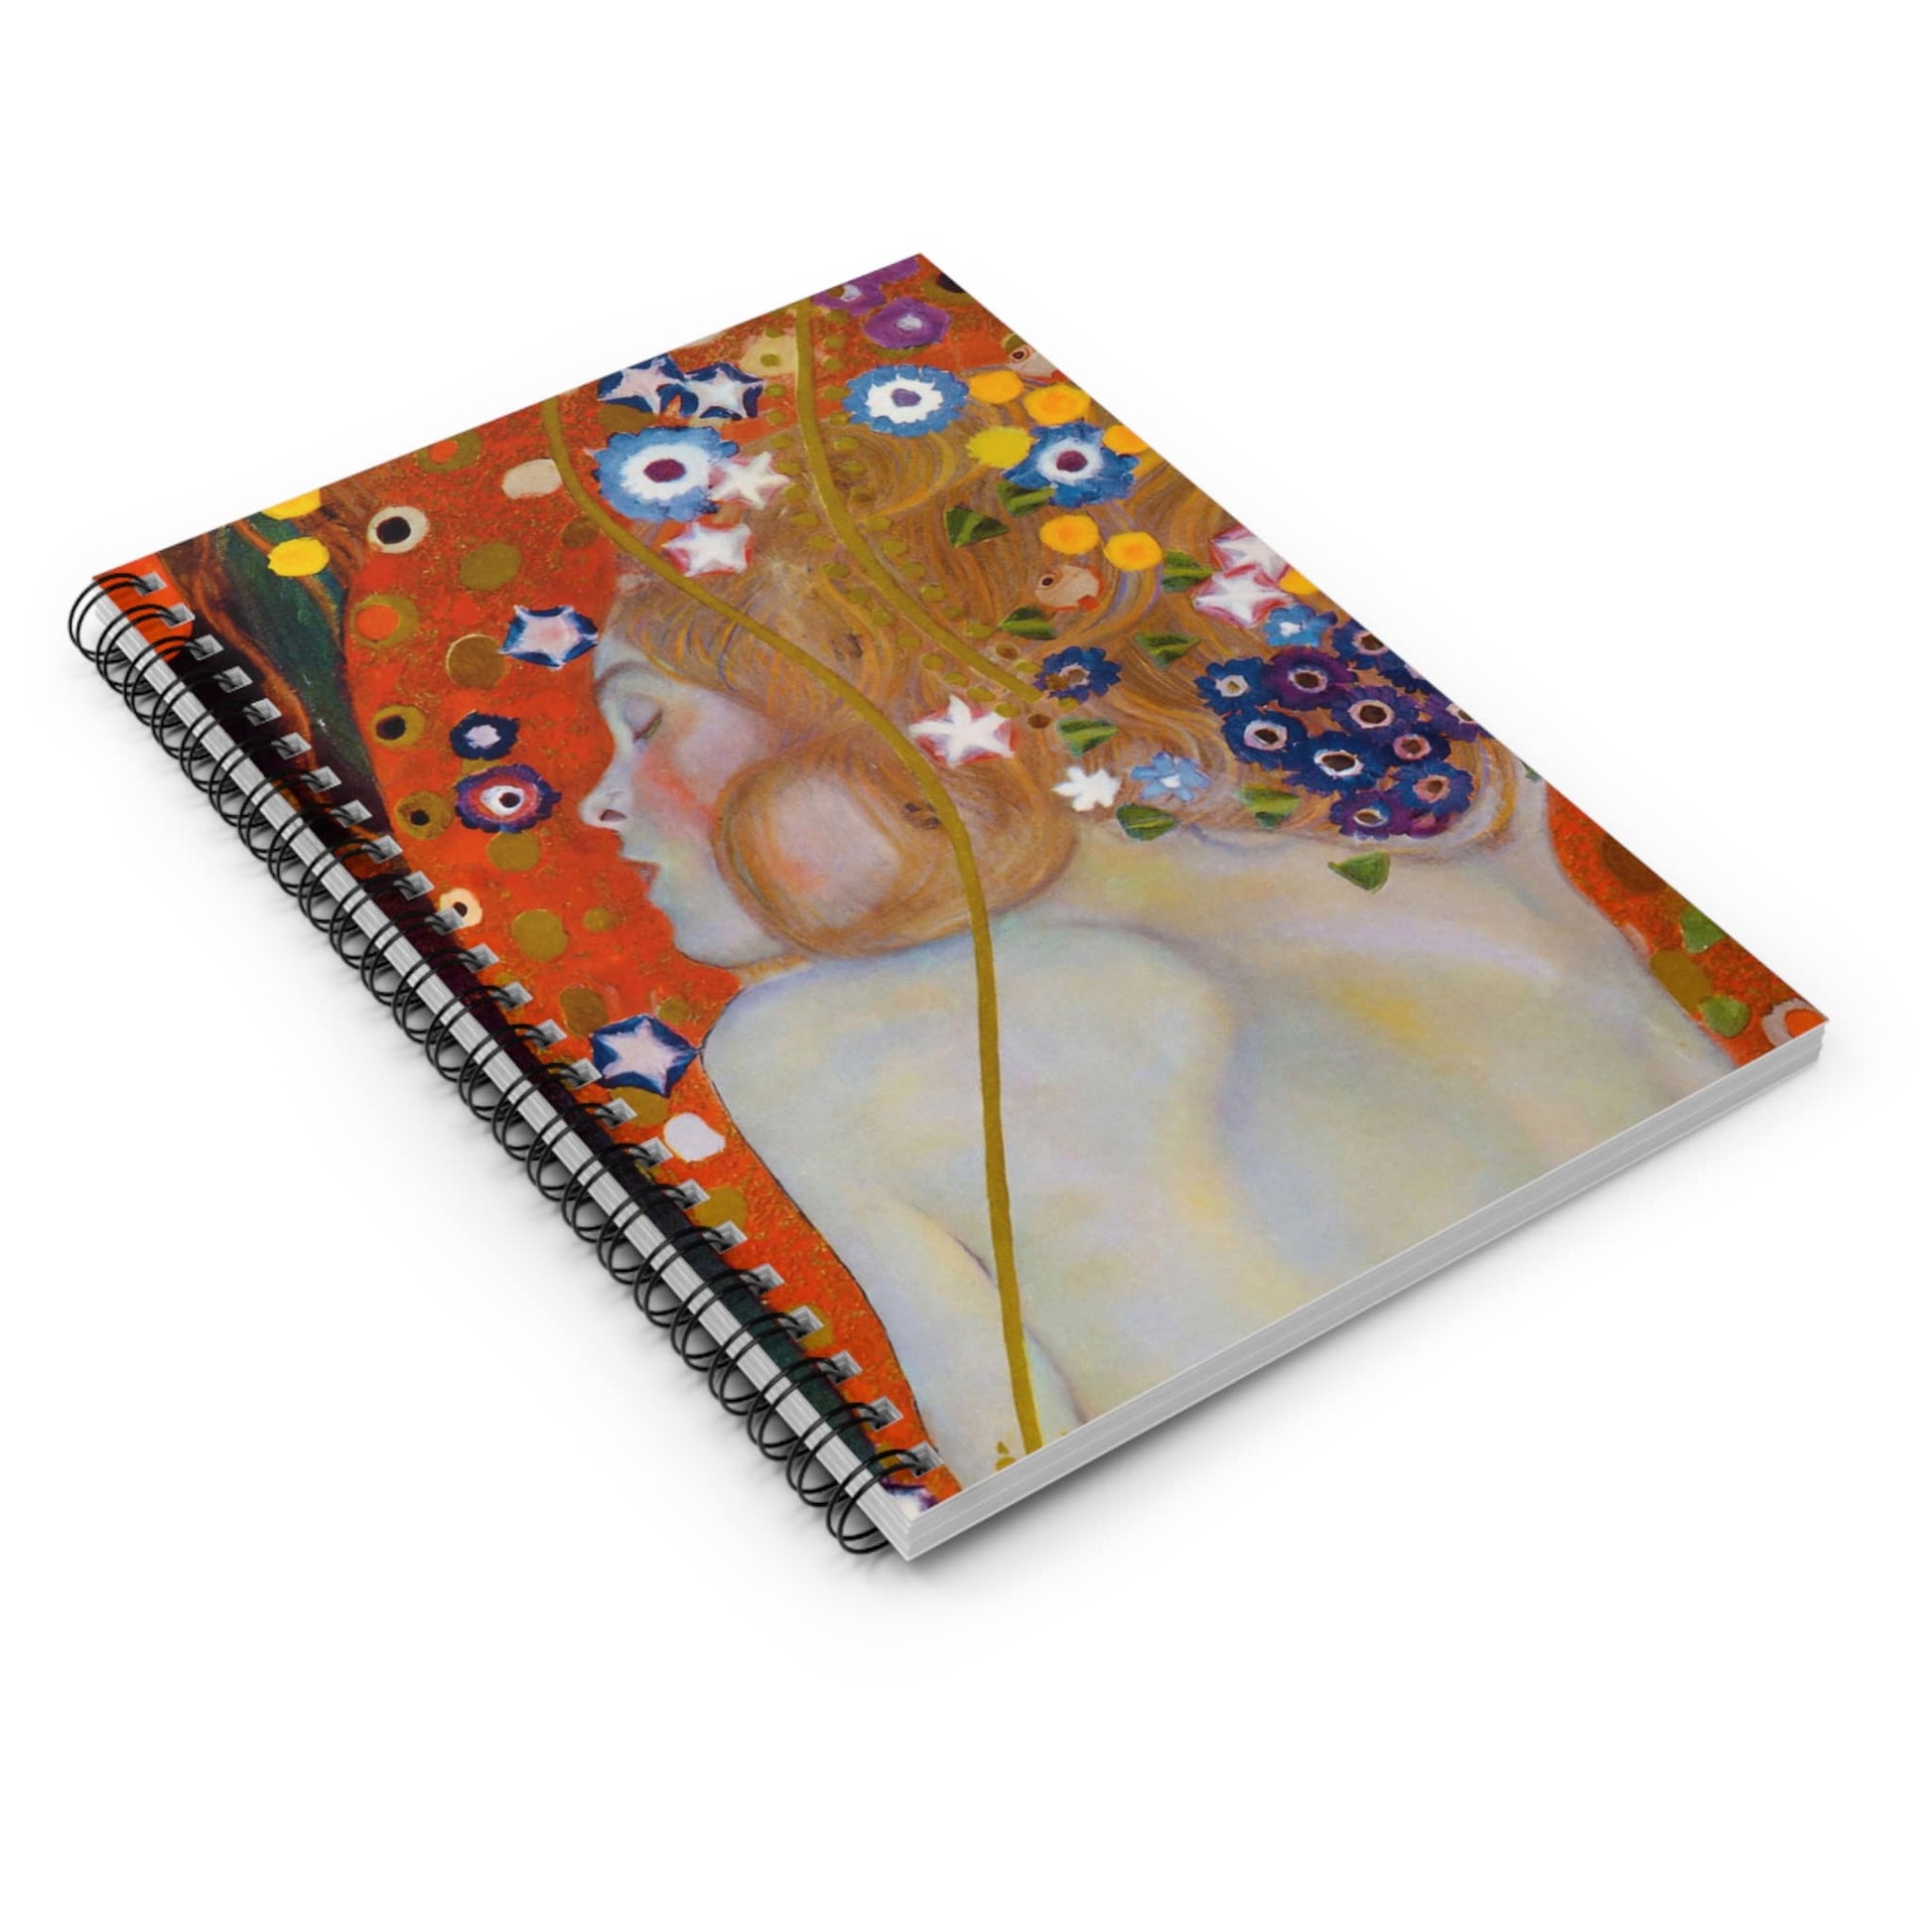 Woman with Flower Hair Spiral Notebook Laying Flat on White Surface